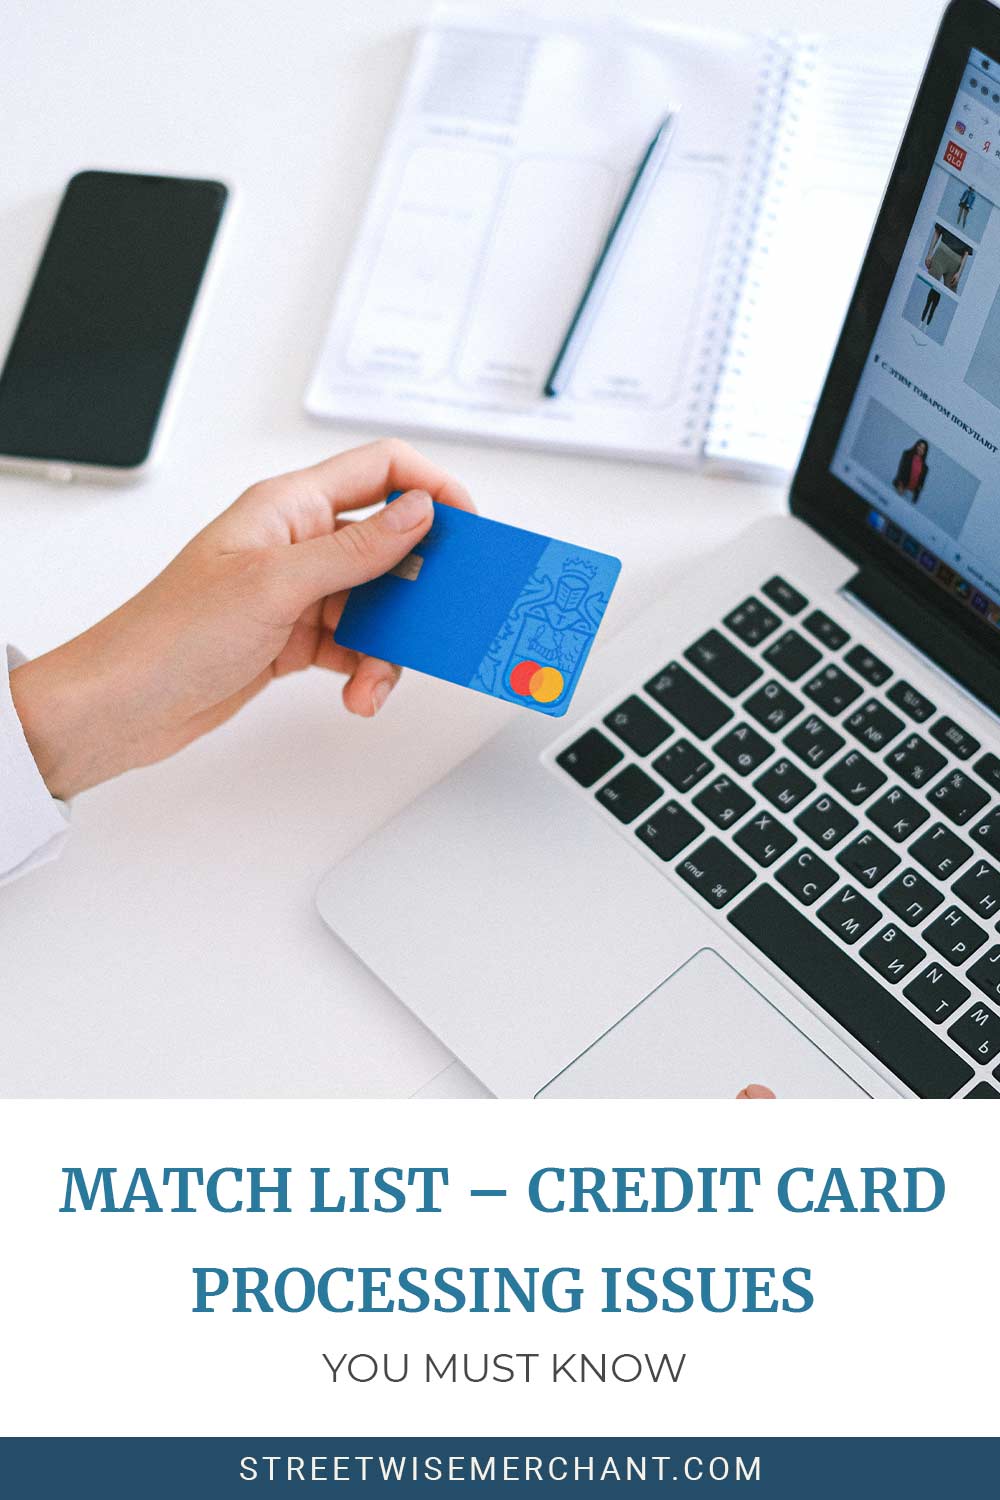 Person holding a blue colour payment card and a laptop on a desk in front of him and exercise book,pen,mobile phone beside it - MATCH List - Credit Card Processing Issues You Must Know.